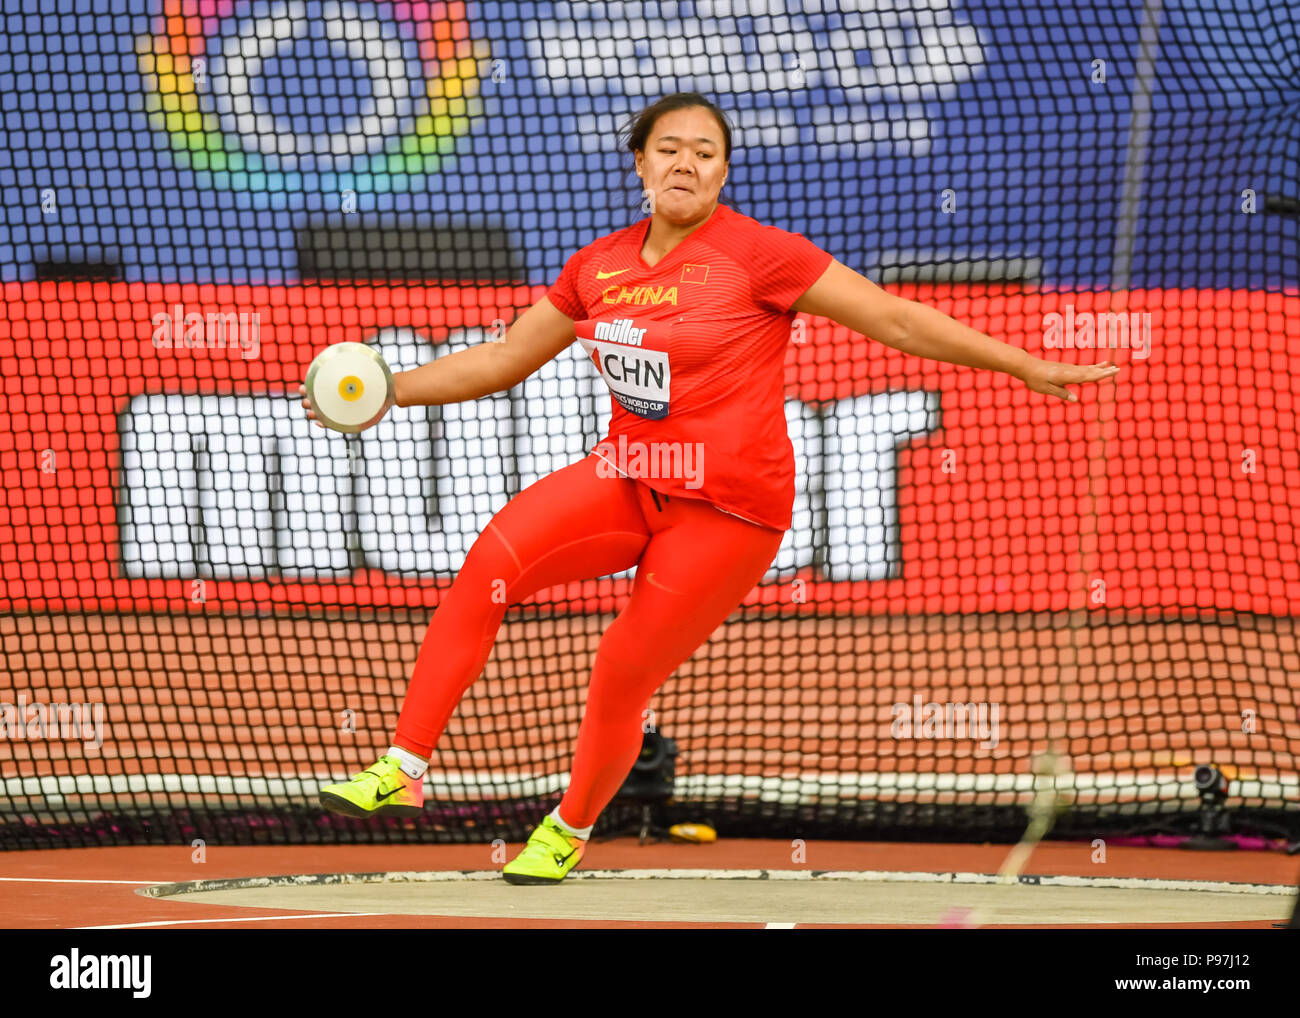 Ximyue Su (CHN) in Women's Discus Throw during Athletics World Cup London 2018 at London Stadium on Sunday, 15 July 2018. LONDON, ENGLAND. Credit: Taka G Wu Stock Photo